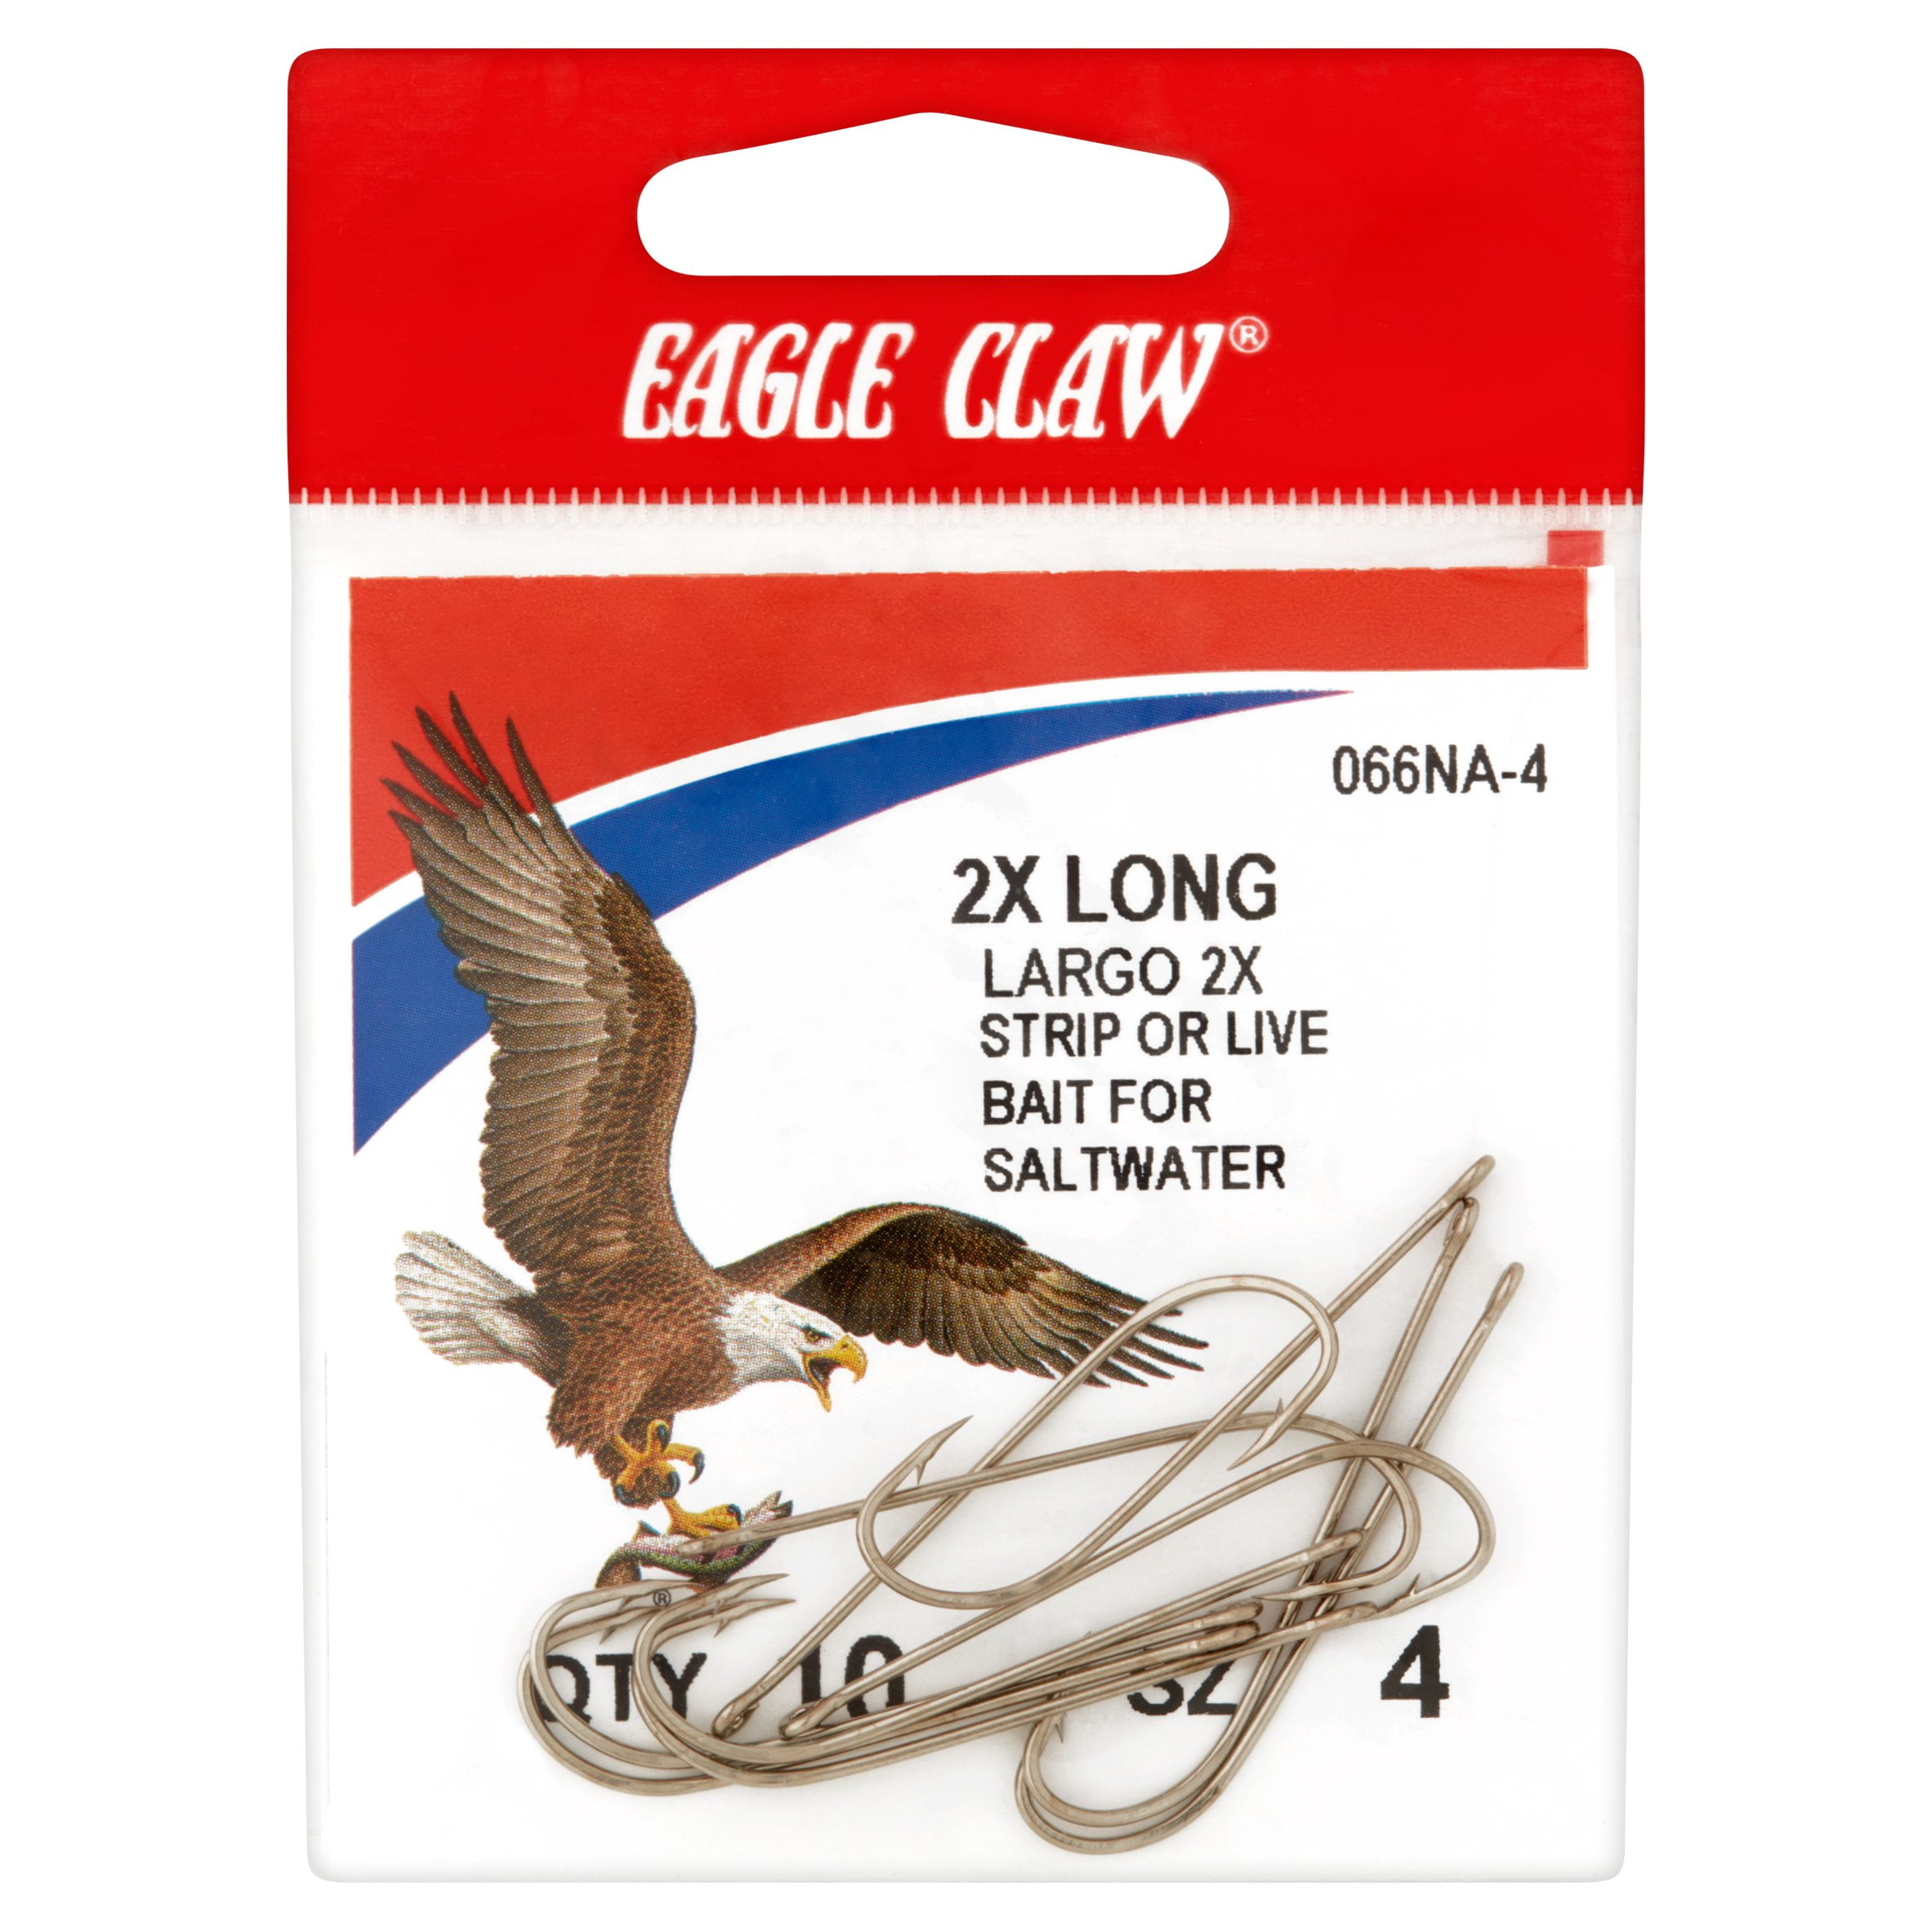 NEW 47708117616 Eagle Claw 202A  Size 1/0 Aberdeen Lot of 5 packages 40 total hooks 